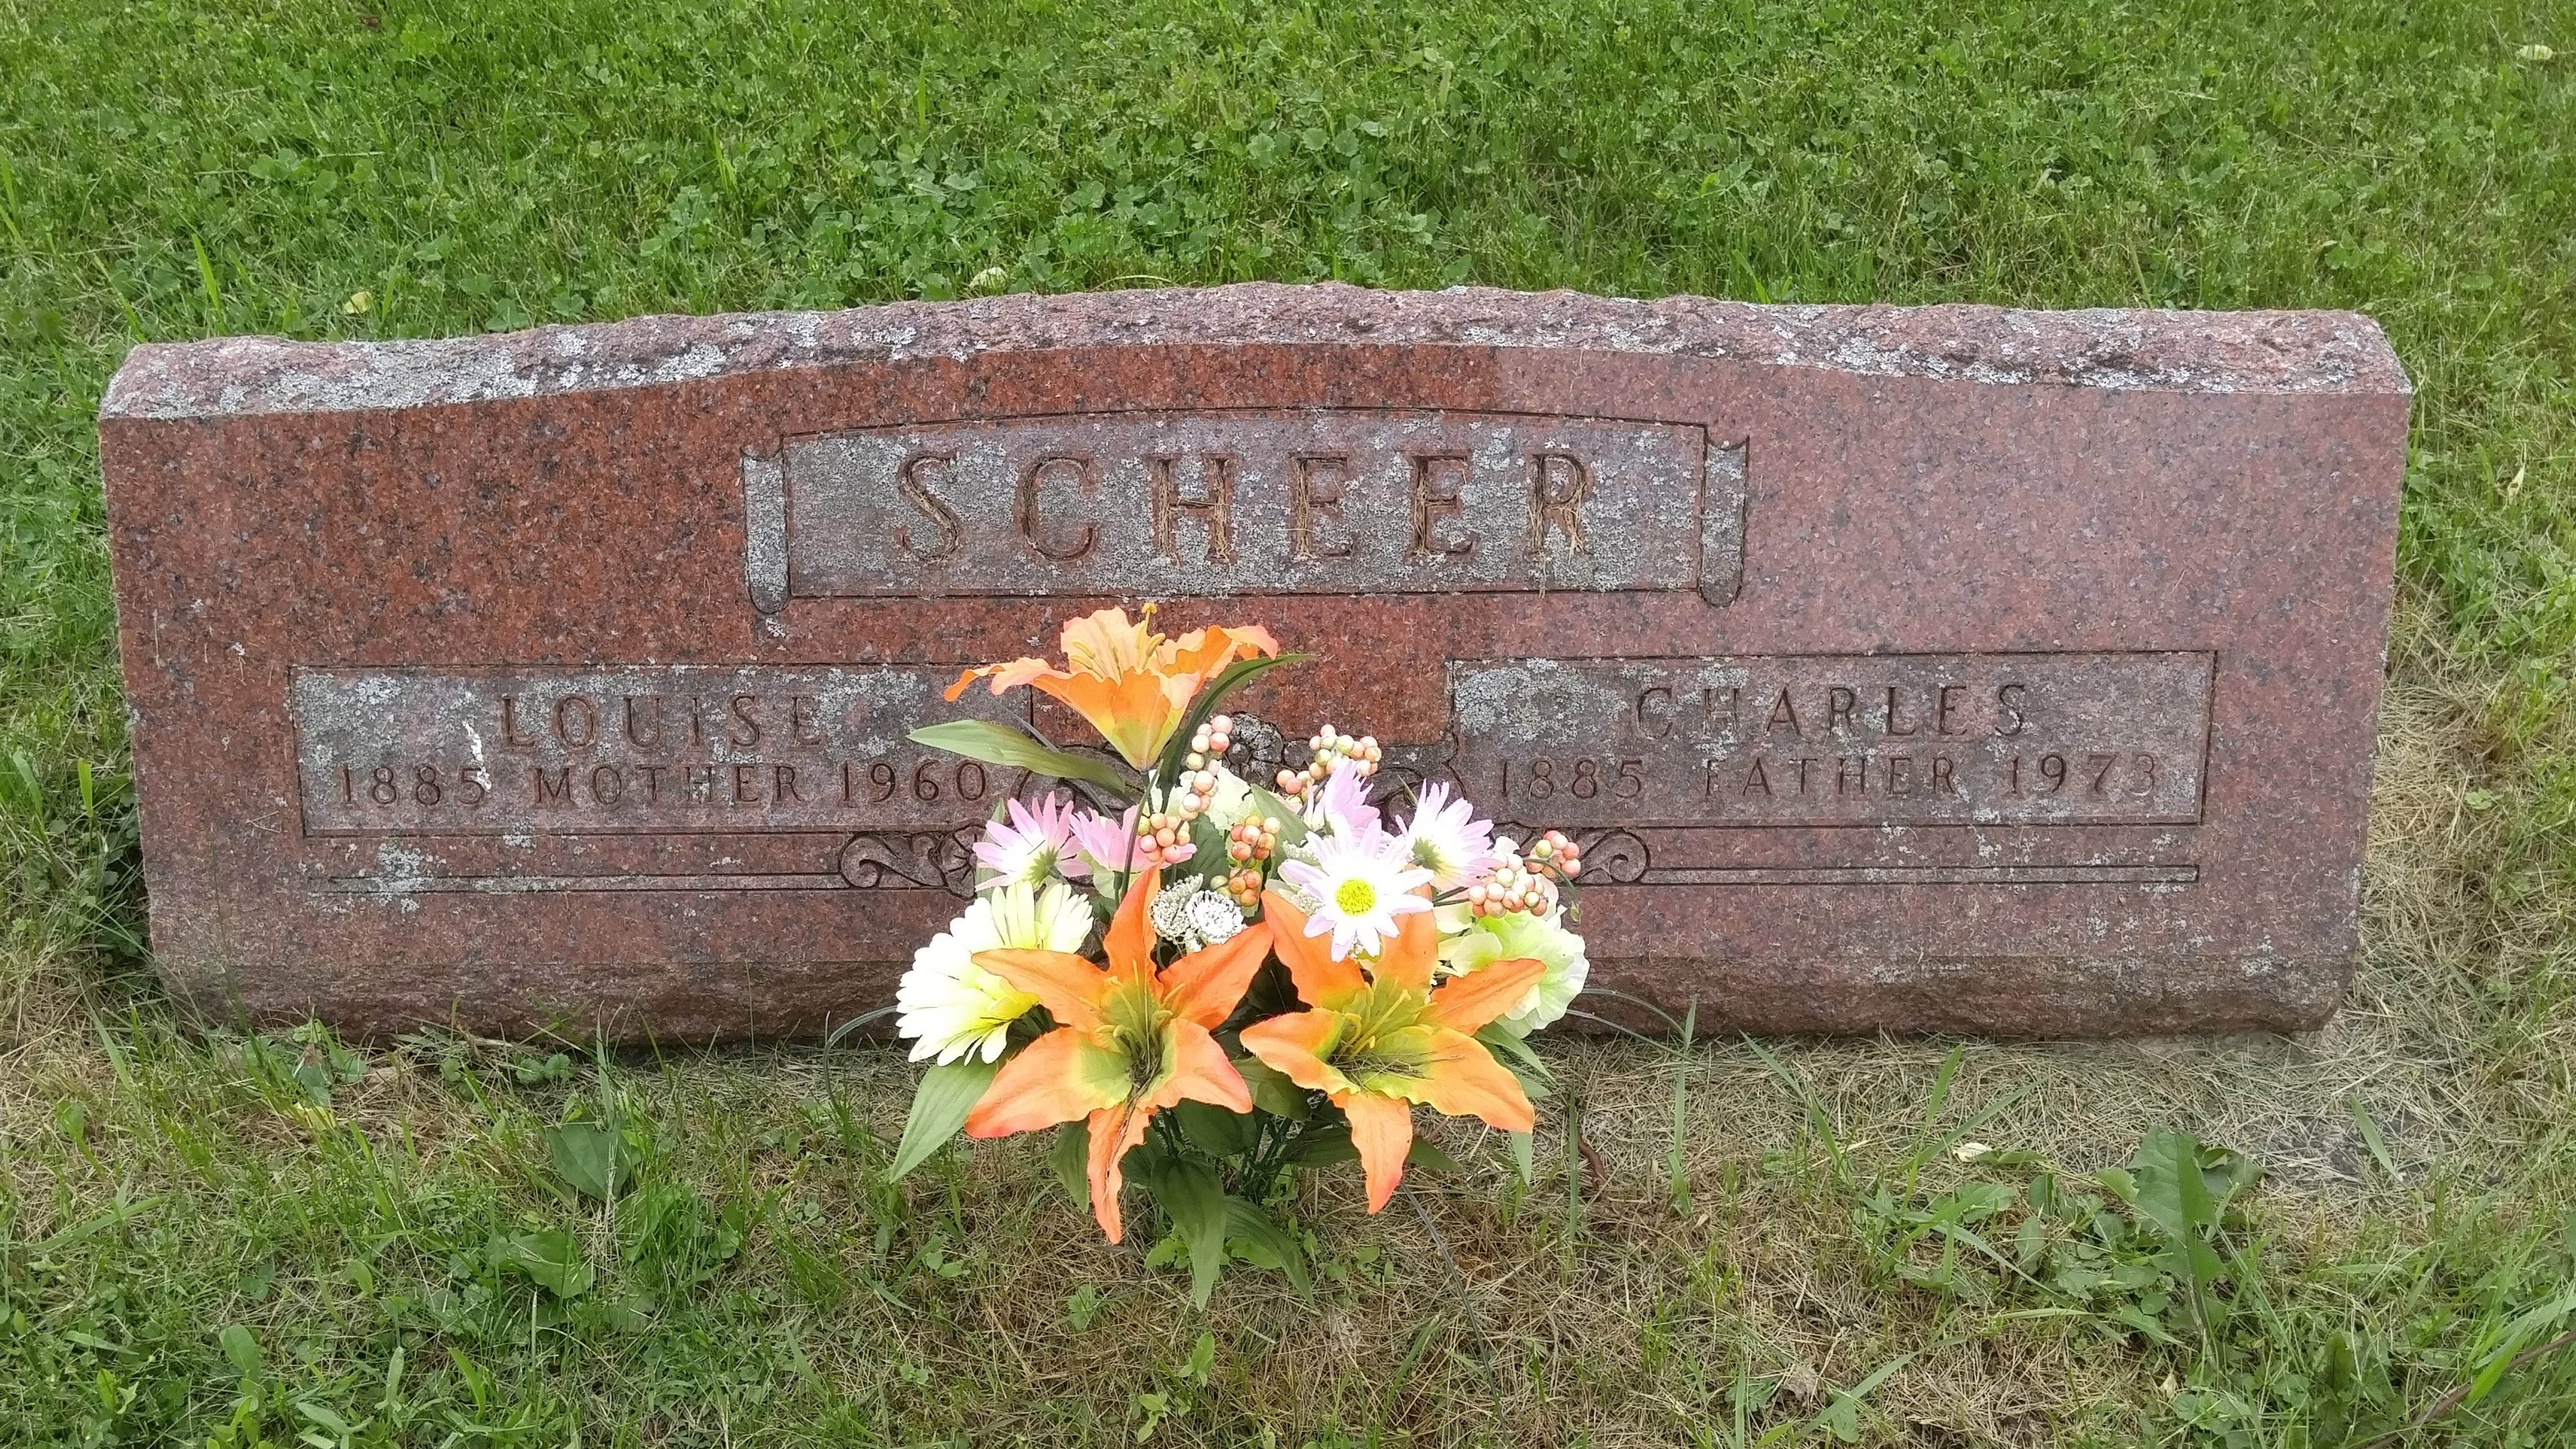 Charles and Louise Scheer's headstone at Fairwater Cemetery